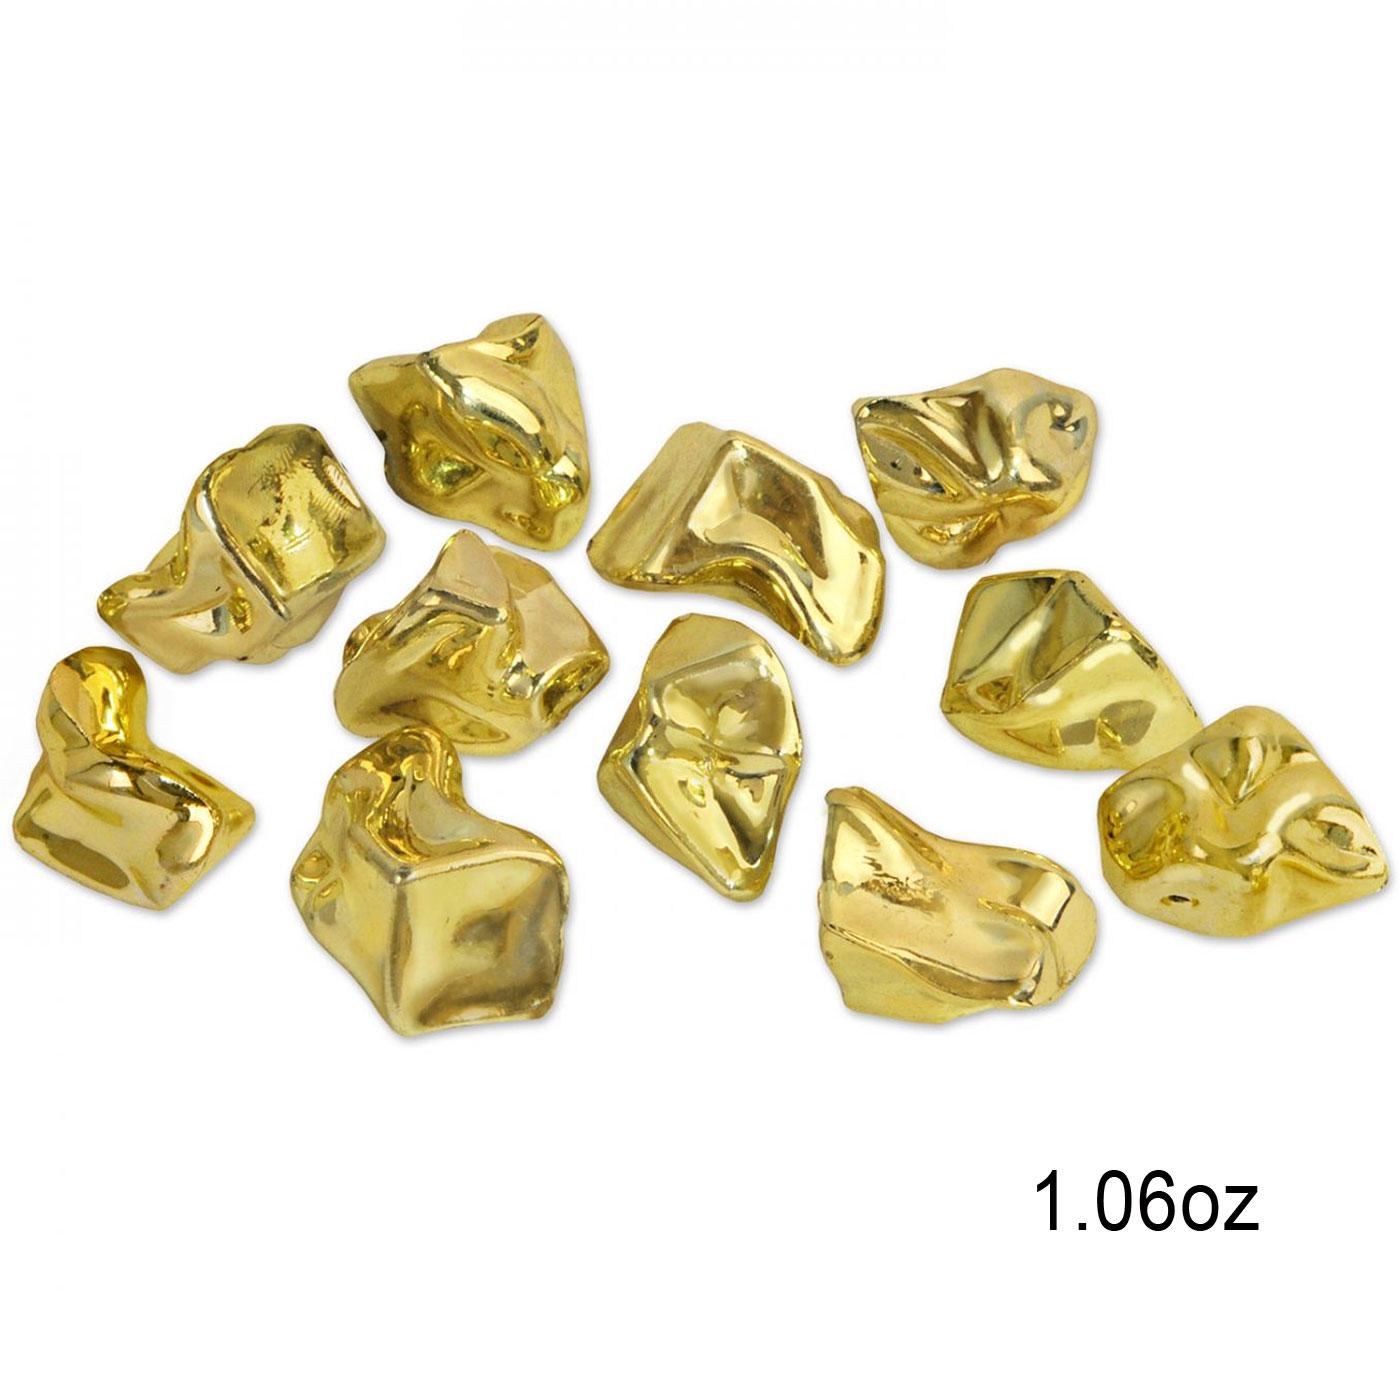 Plastic Gold Nuggets pkt 1.06oz by Beistle 52168 available here at Karnival Costumes online party shop